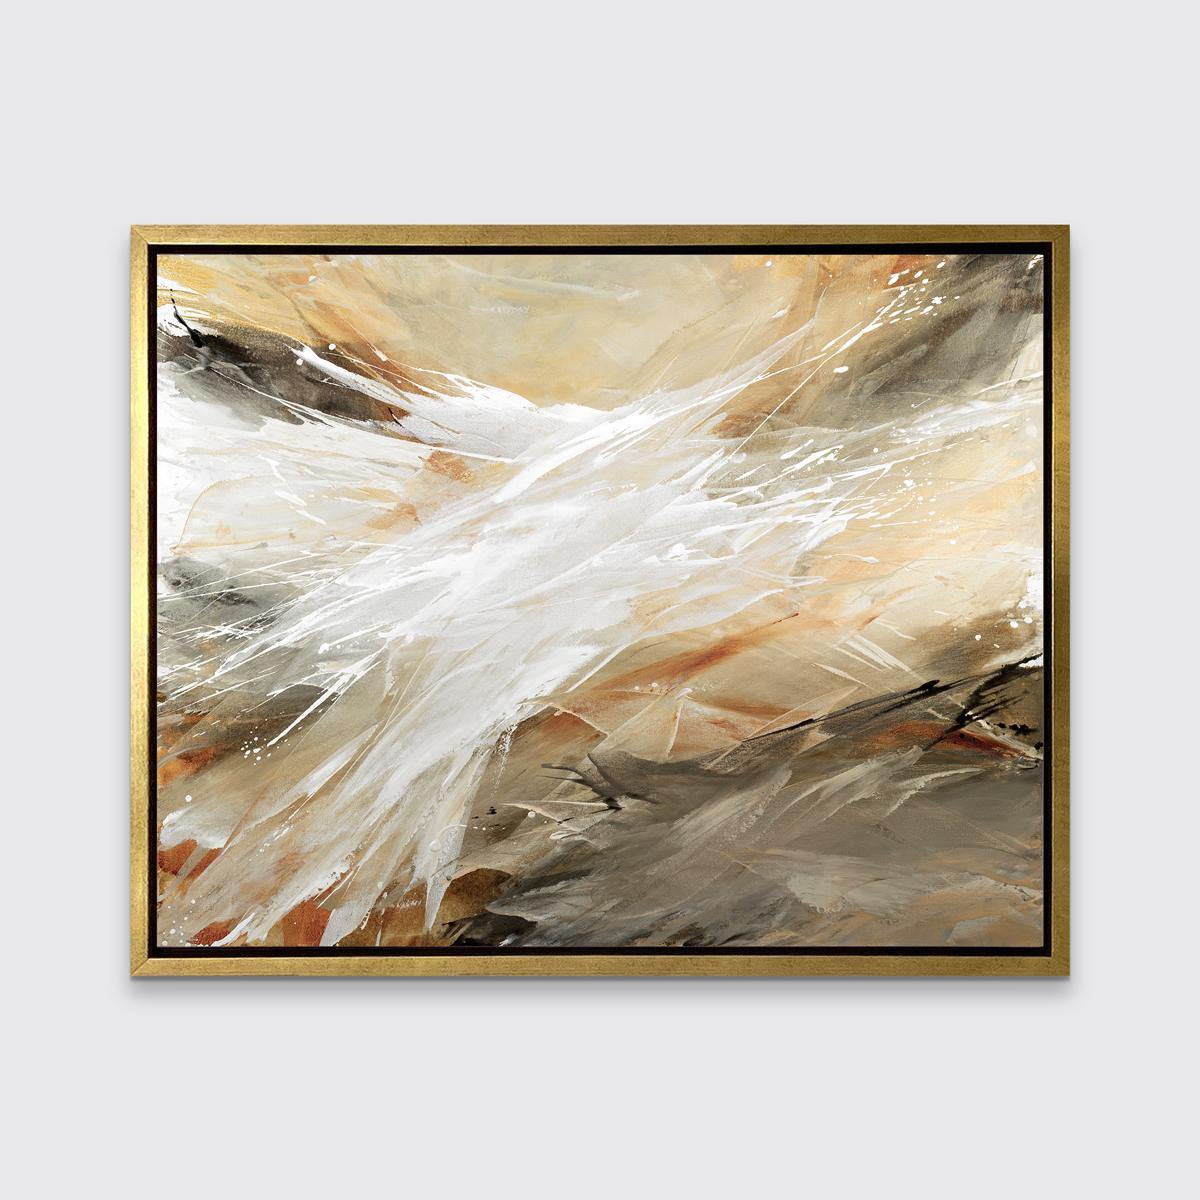 This abstract limited edition print by Teodora Guererra features a warm palette, with thin layers of warm grey and burnt sienna tones layered over top of one another. White is layered on top, creating an energetic movement that spans out from the